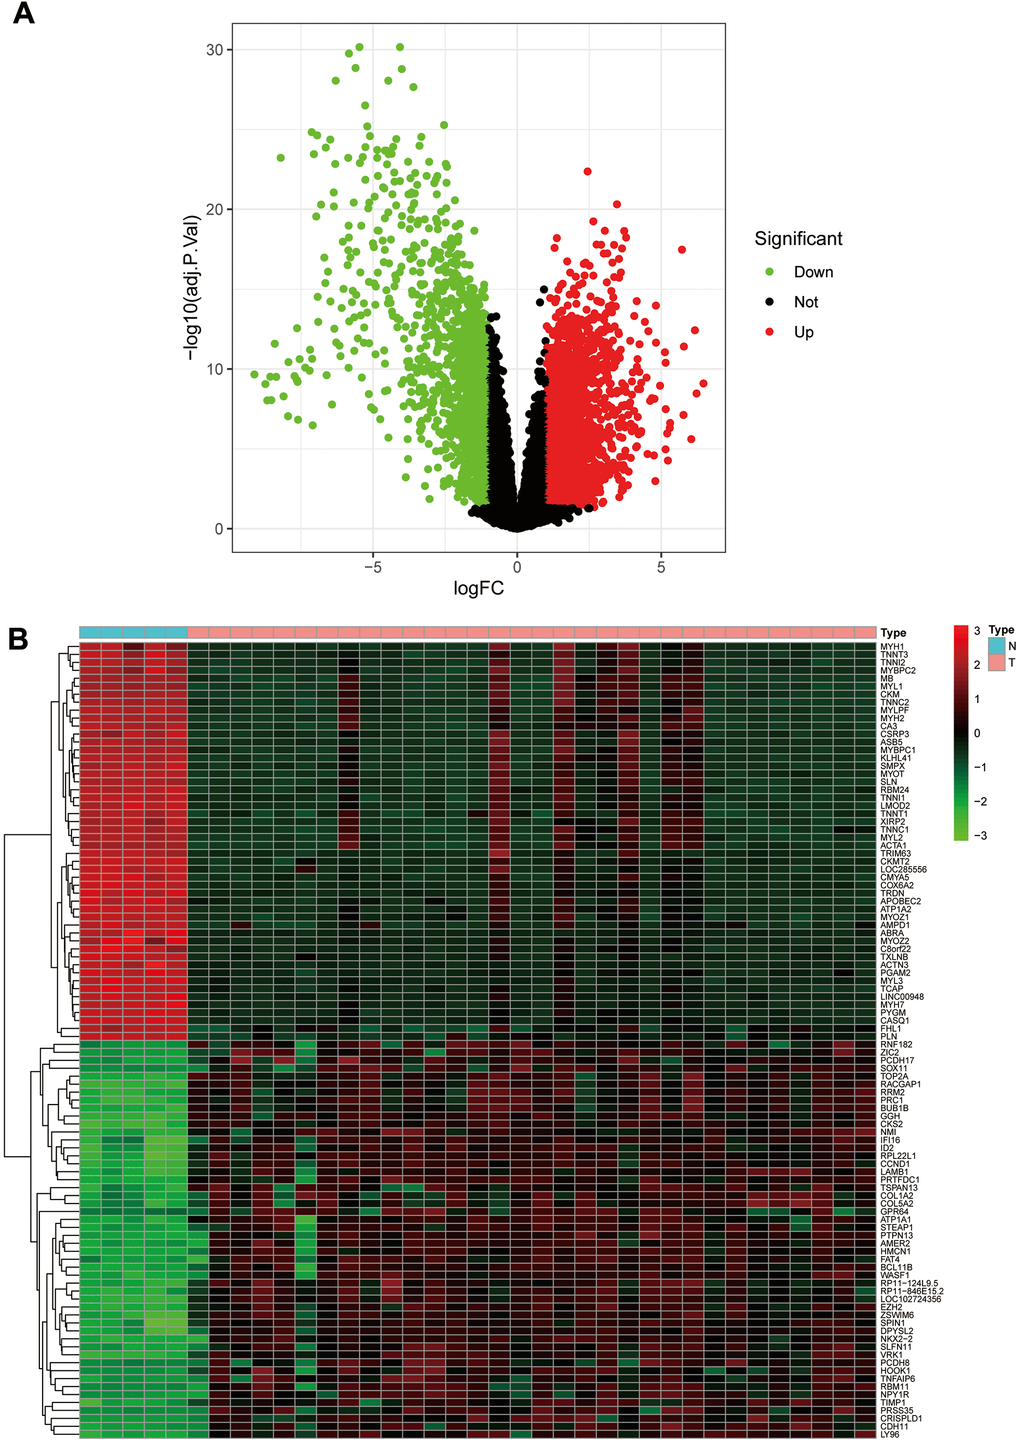 The volcano plot and heat map of differentially expressed genes. (A) The volcano plot; red dots are upregulated genes, green dots are downregulated genes, and black dots are nonsignificant differentially expressed genes. (B) The heat map; red rectangular blocks are highly expressed genes, and green rectangular blocks are poorly expressed genes.